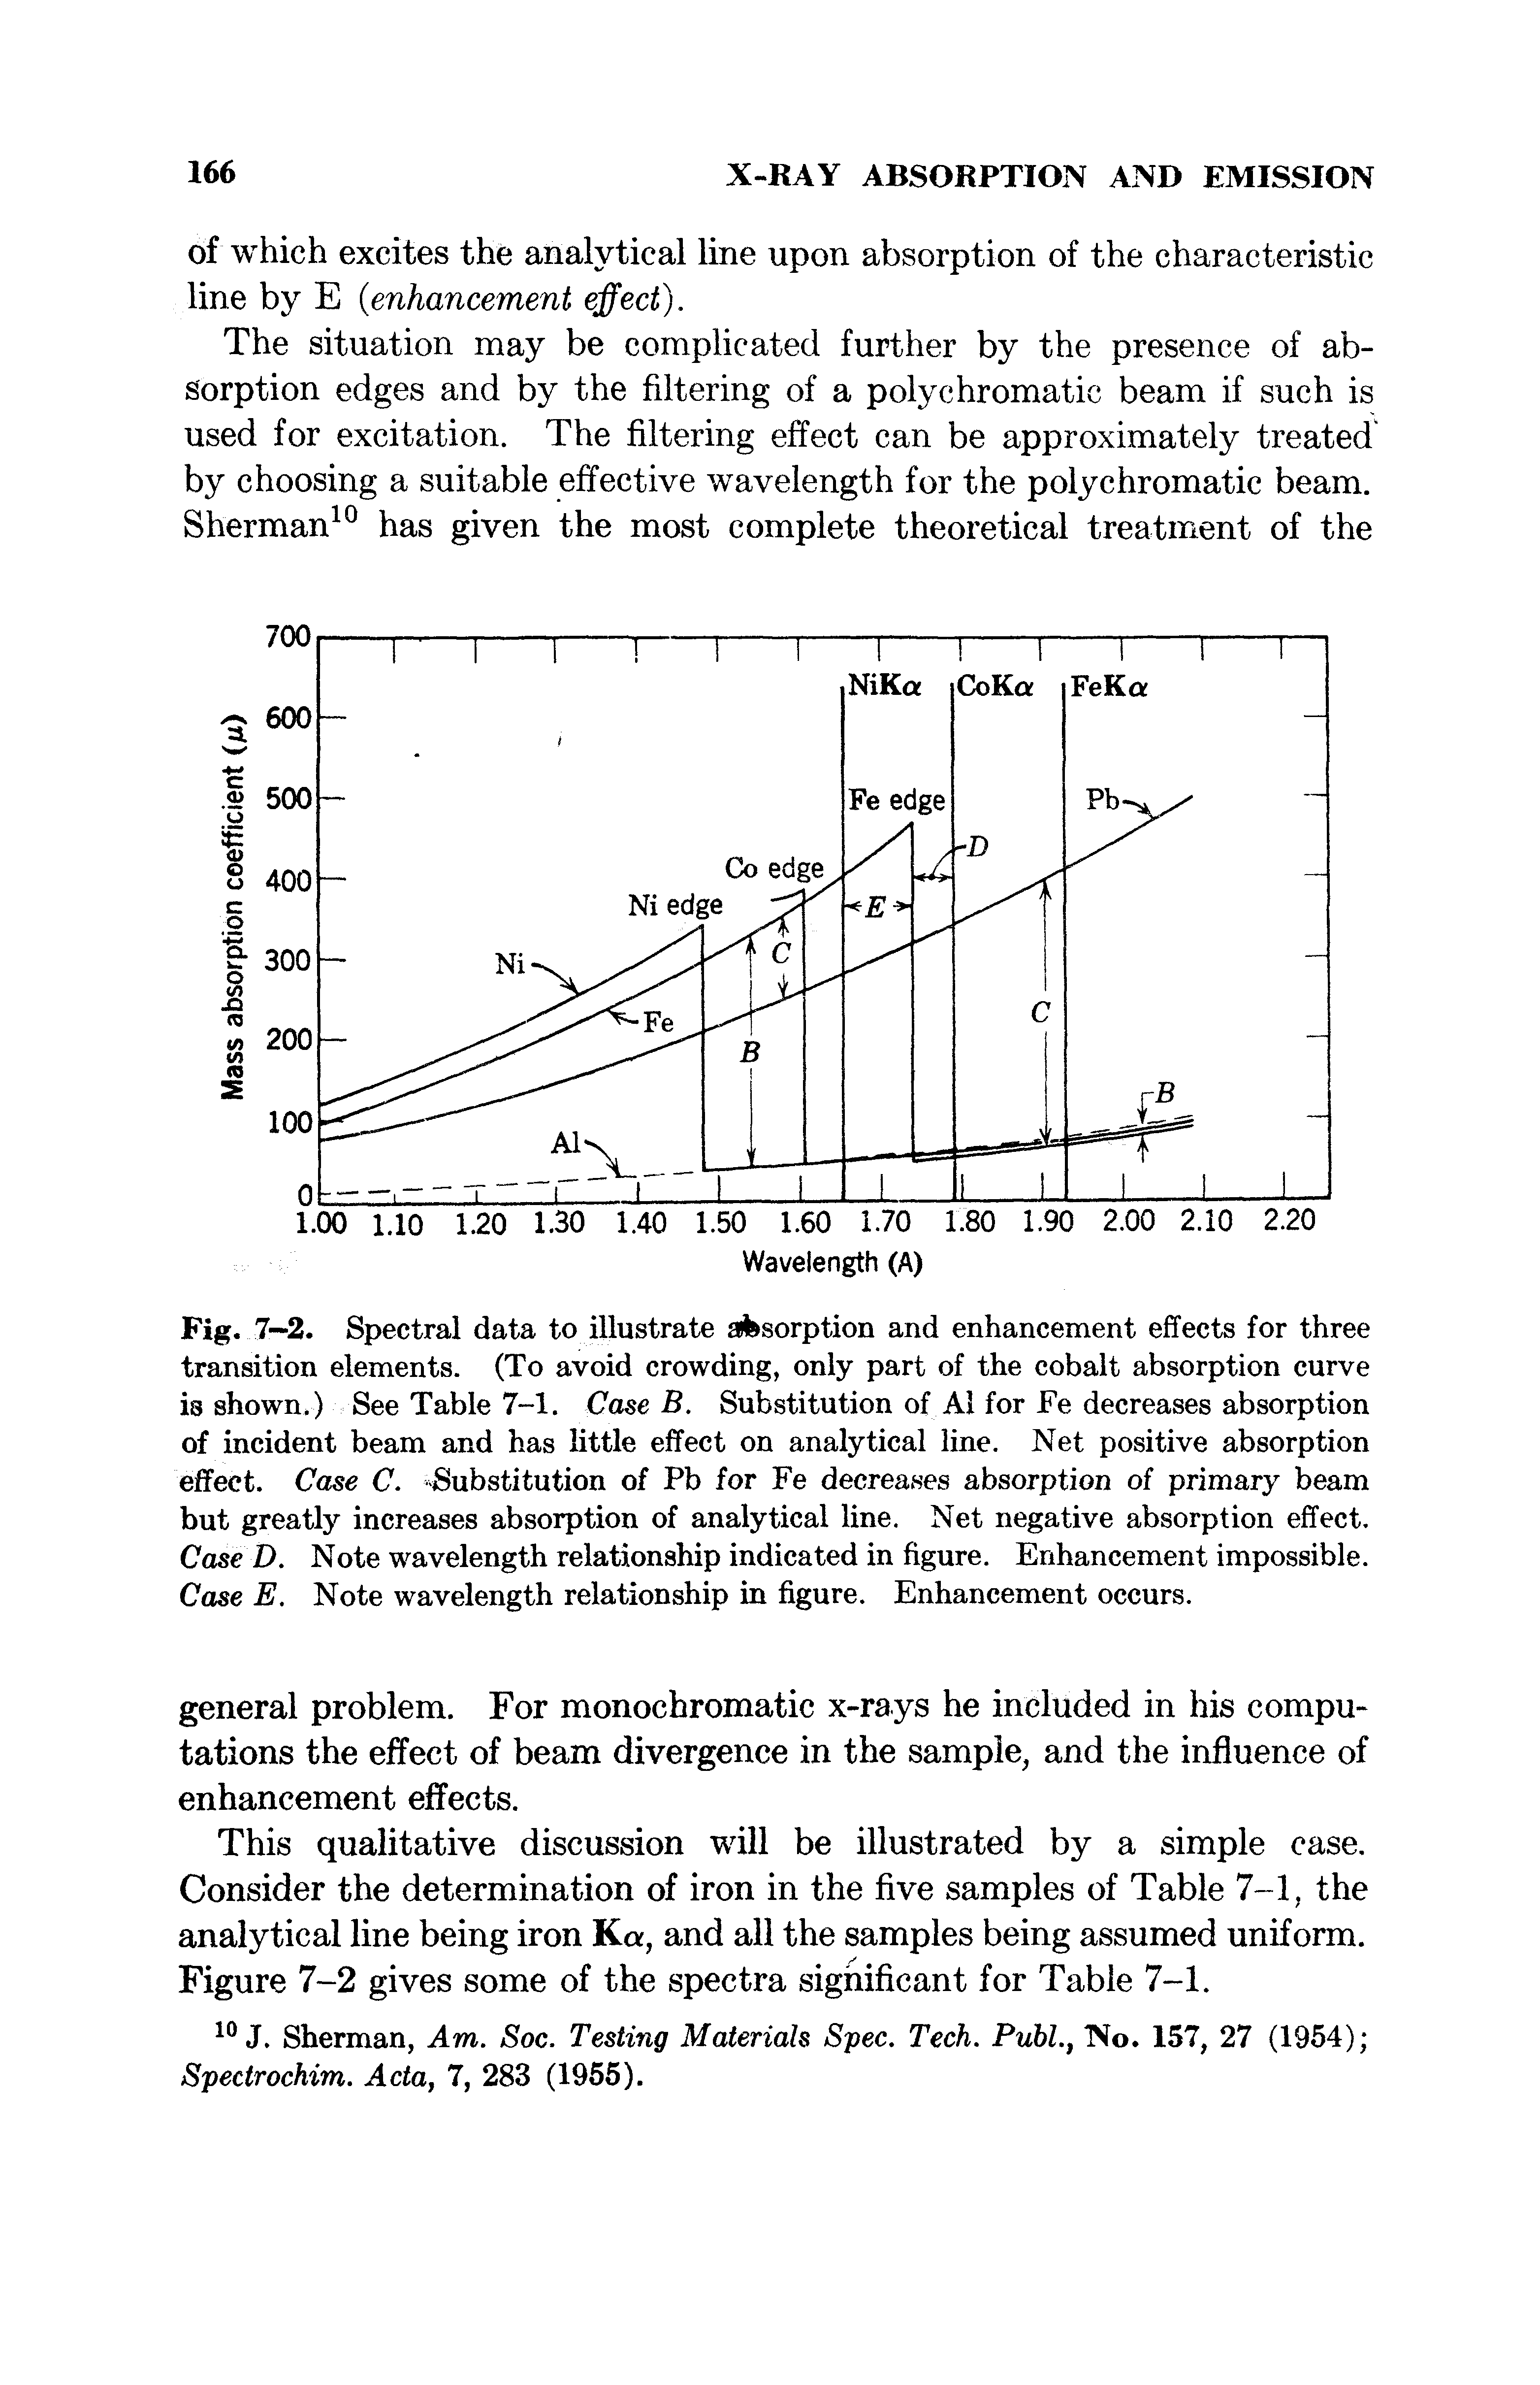 Fig. 7—2. Spectral data to illustrate absorption and enhancement effects for three transition elements. (To avoid crowding, only part of the cobalt absorption curve is shown.) See Table 7-1. Case B. Substitution of A1 for Fe decreases absorption of incident beam and has little effect on analytical line. Net positive absorption effect. Case C. Substitution of Pb for Fe decreases absorption of primary beam but greatly increases absorption of analytical line. Net negative absorption effect. Case D. Note wavelength relationship indicated in figure. Enhancement impossible. Case E. Note wavelength relationship in figure. Enhancement occurs.